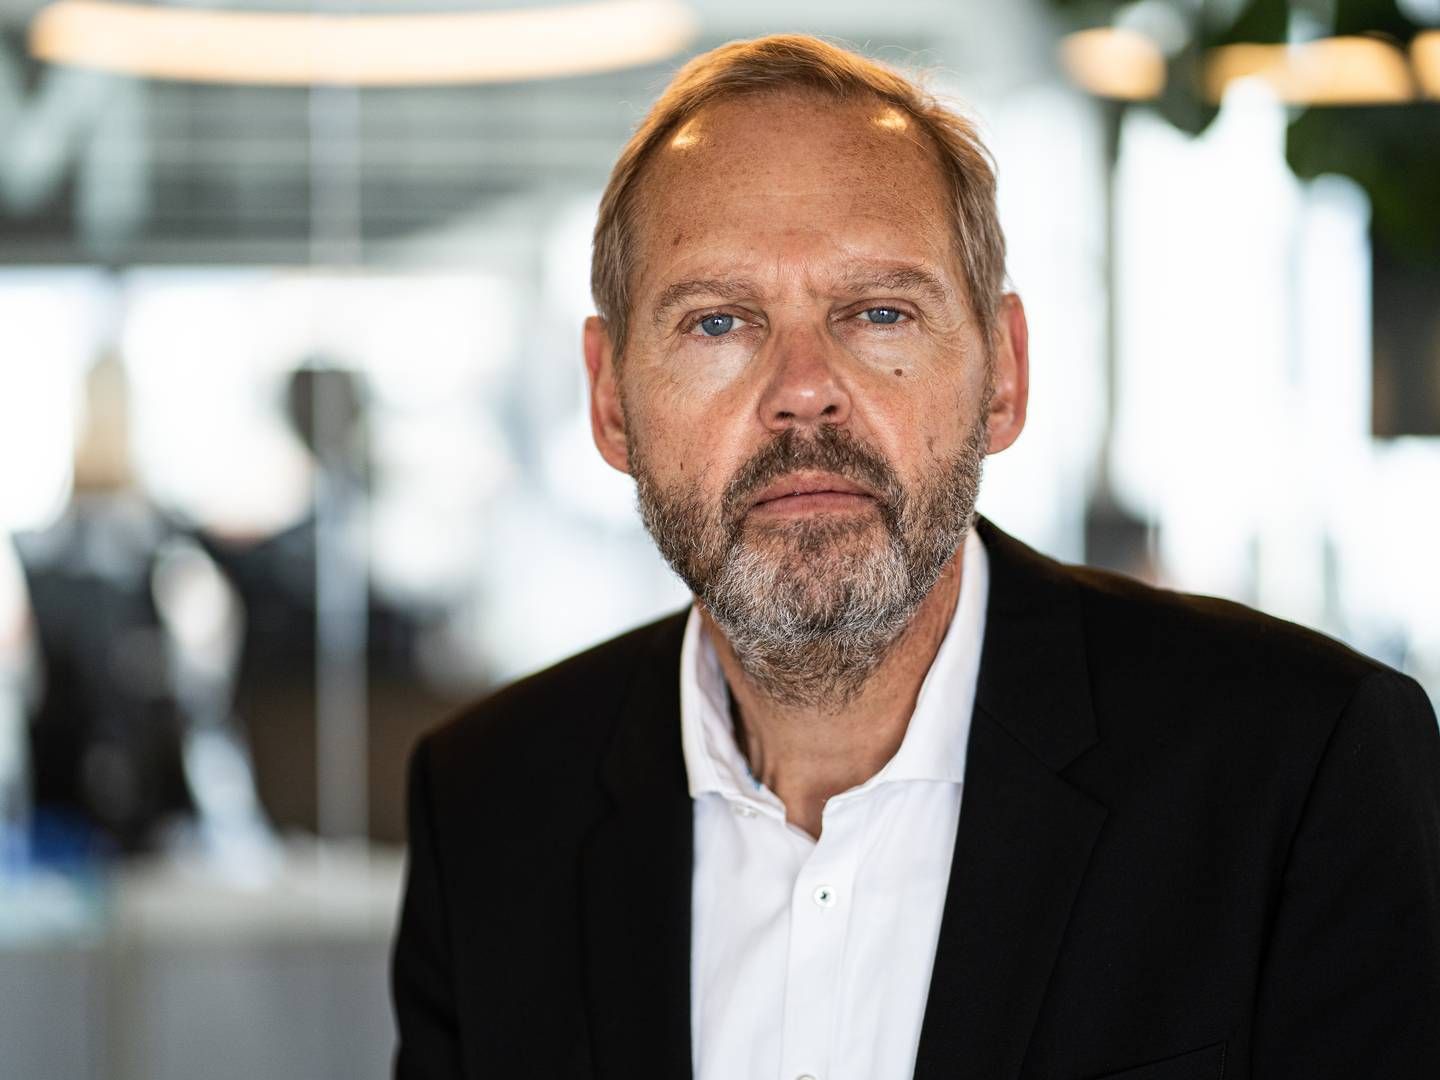 Flemming Højbo writes analyses for AMWatch about the Nordic asset and wealth management sector. Højbo was head of communications in the asset management industry for 15 years, and before that, he worked for 25 years as financial and business reporter and editor. | Foto: Jan Bjarke Mindegaard